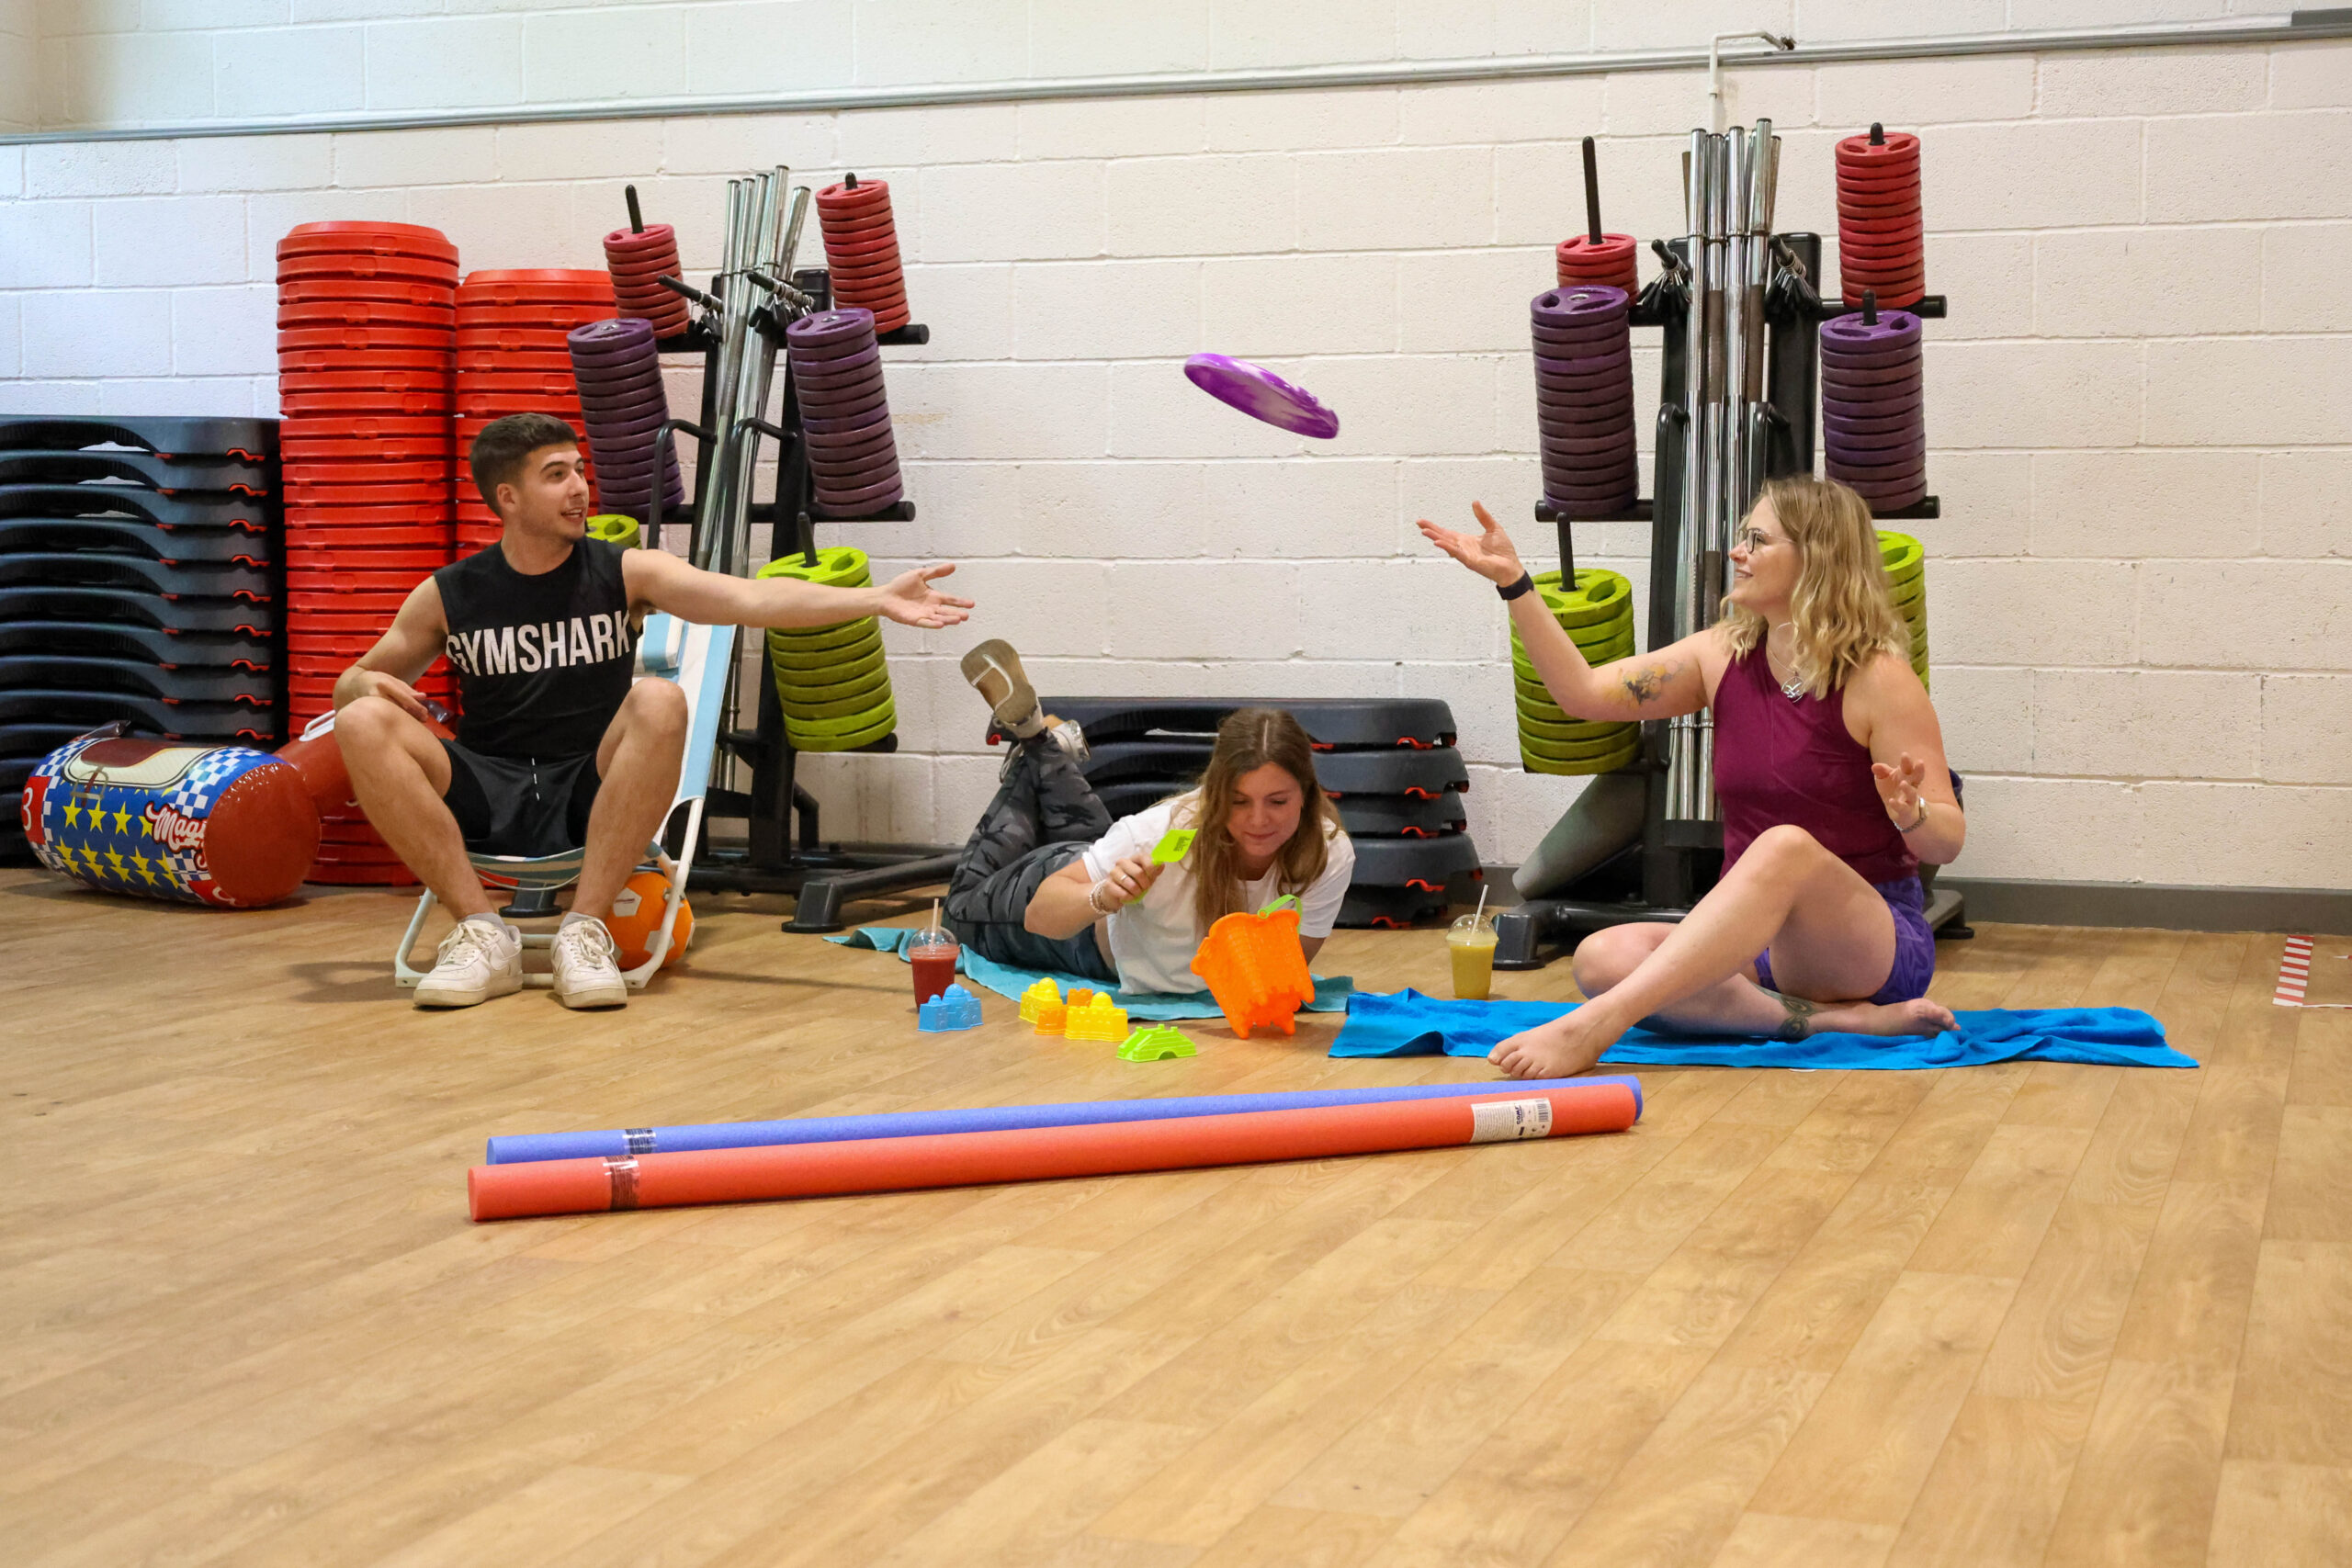 a group of people sitting on the floor of a gym pretending it is the beach